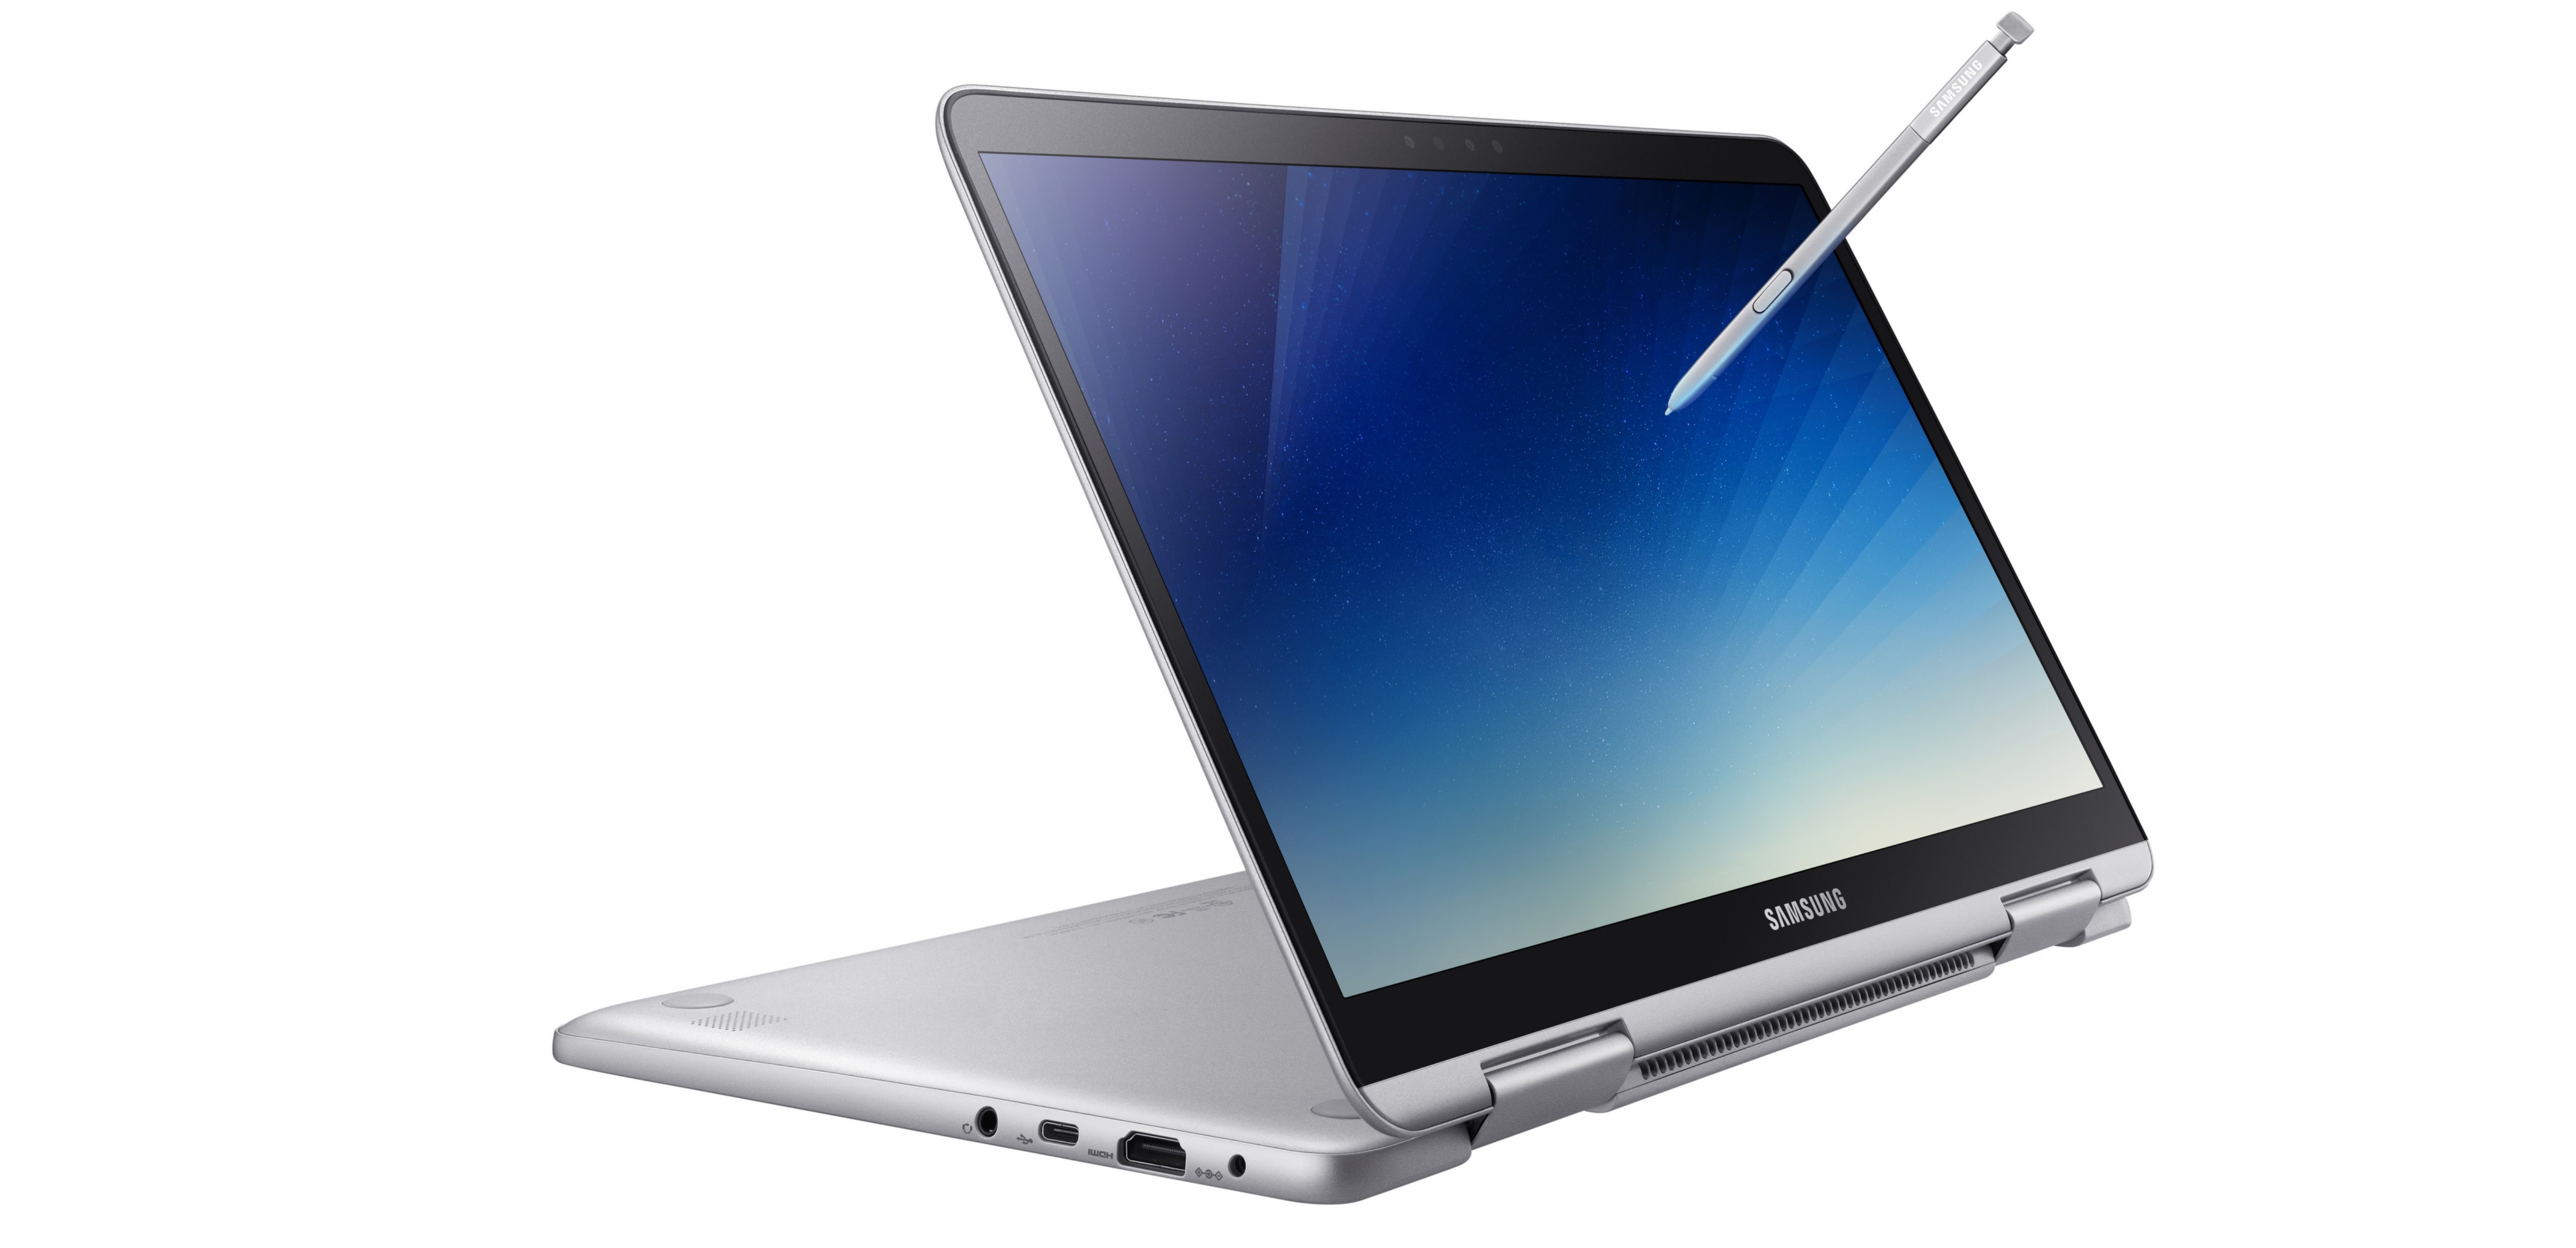 The new Samsung Notebook 9 with Pen